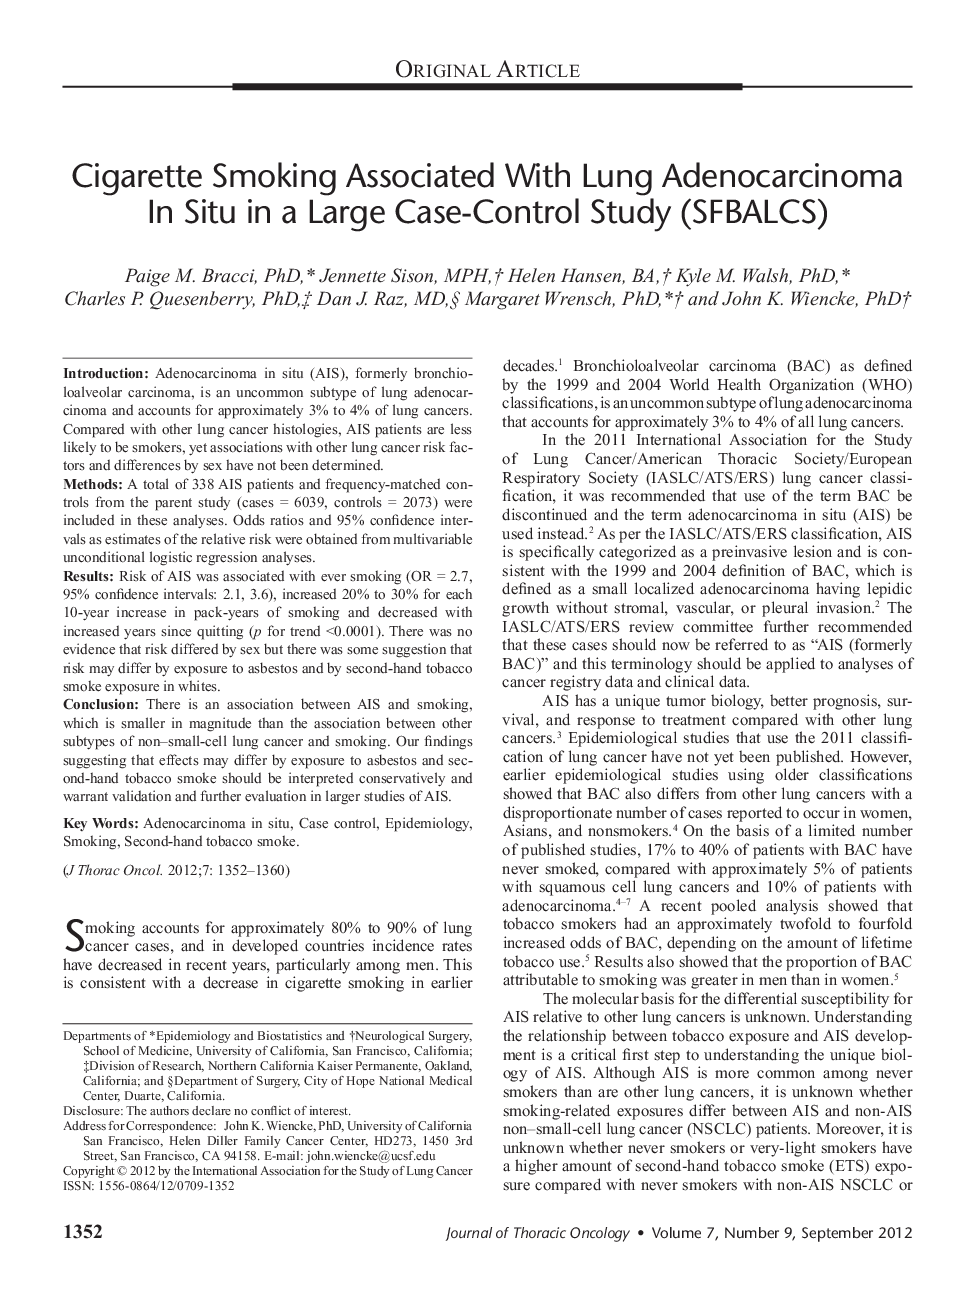 Cigarette Smoking Associated With Lung Adenocarcinoma In Situ in a Large Case-Control Study (SFBALCS) 